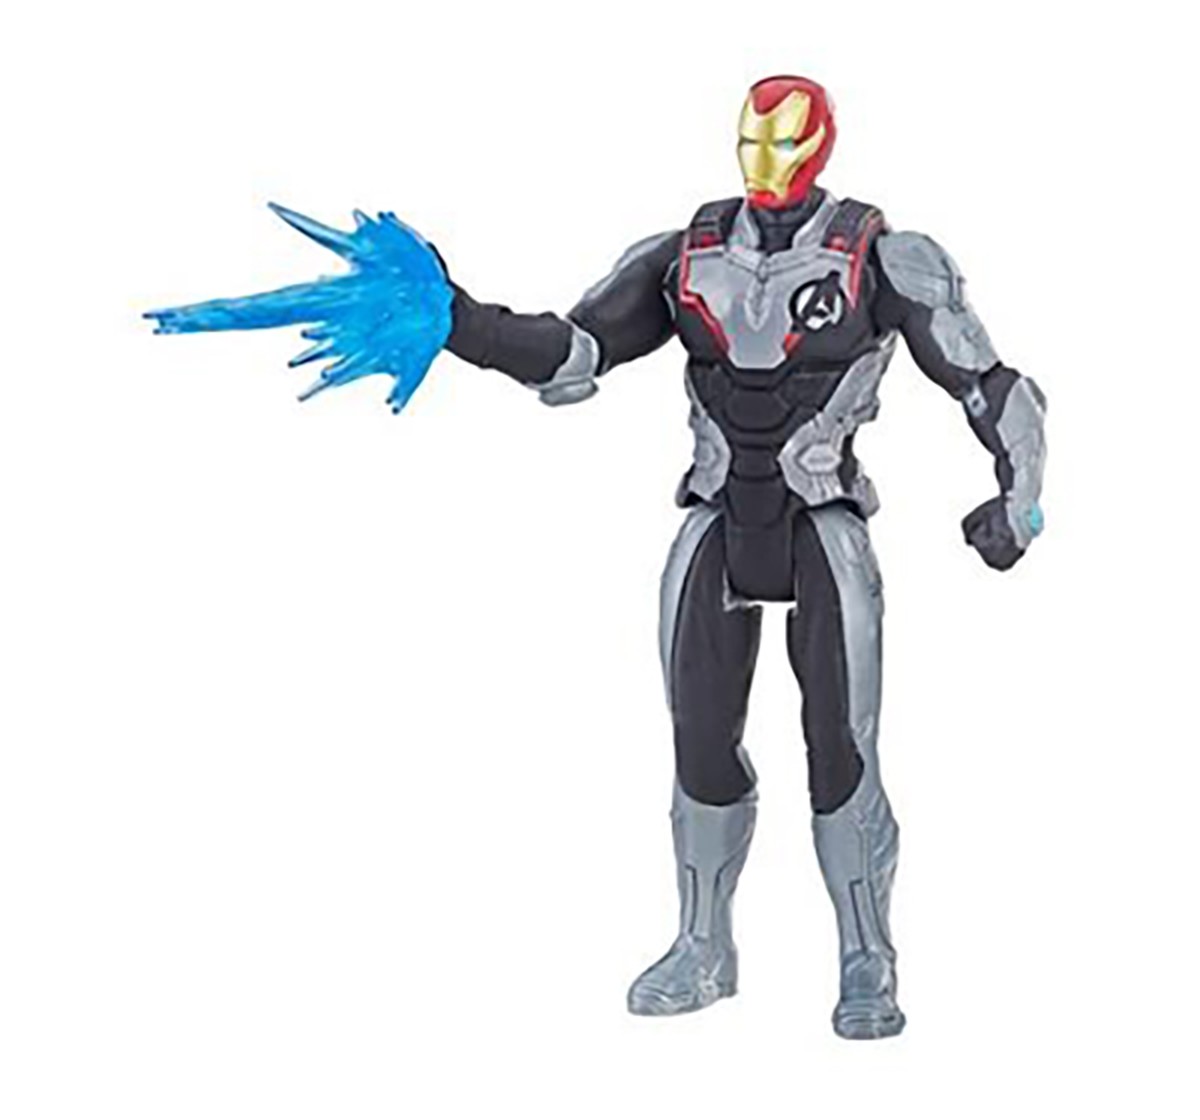 Marvel Avengers: Endgame 6-Inch Action Figures Assorted for Kids age 4Y+ 